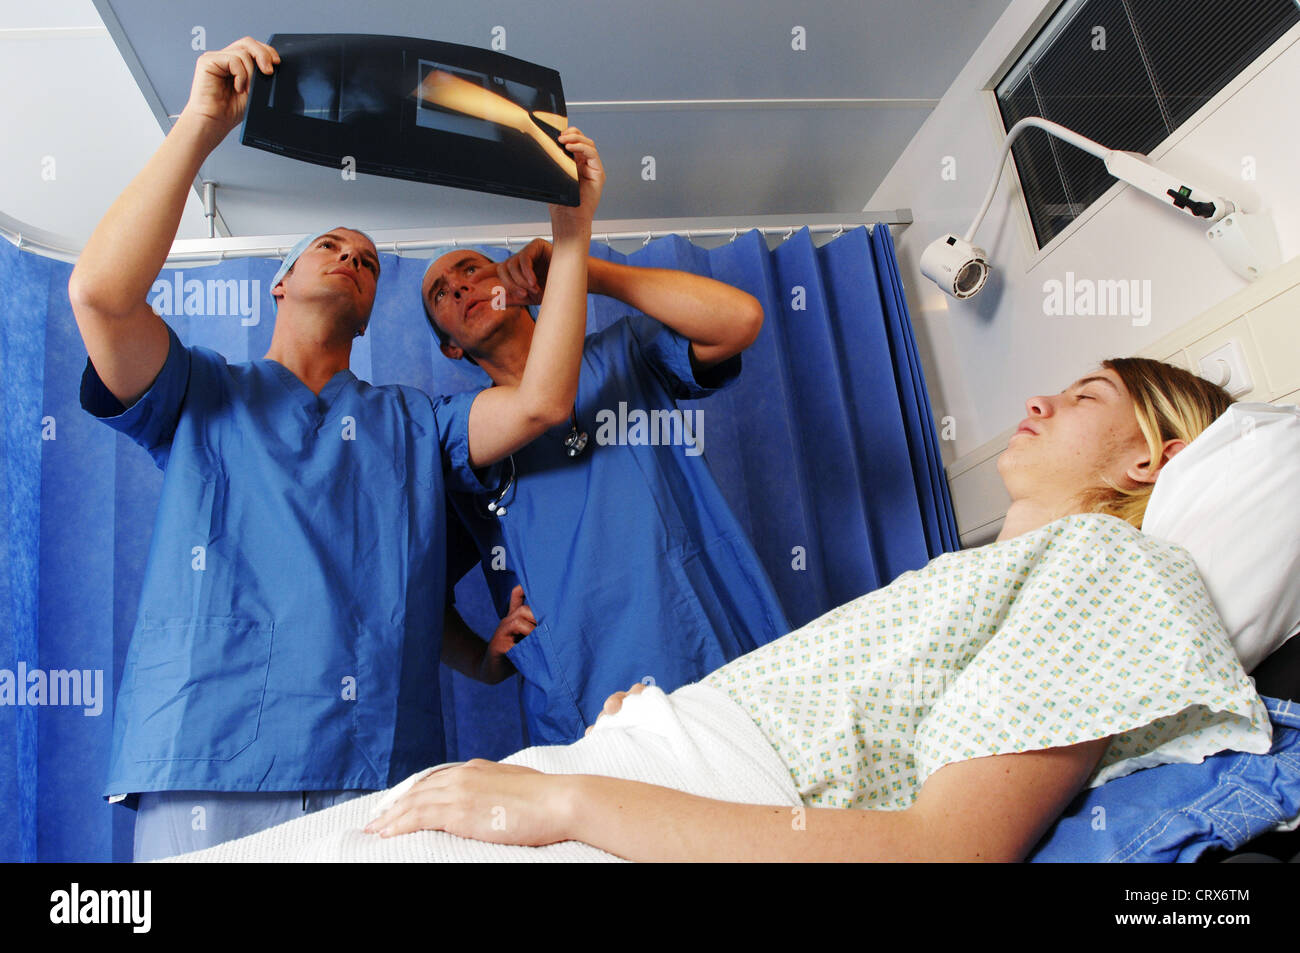 Two surgeons wearing blue surgical caps and gowns, reviewing a patient's x-ray. Stock Photo